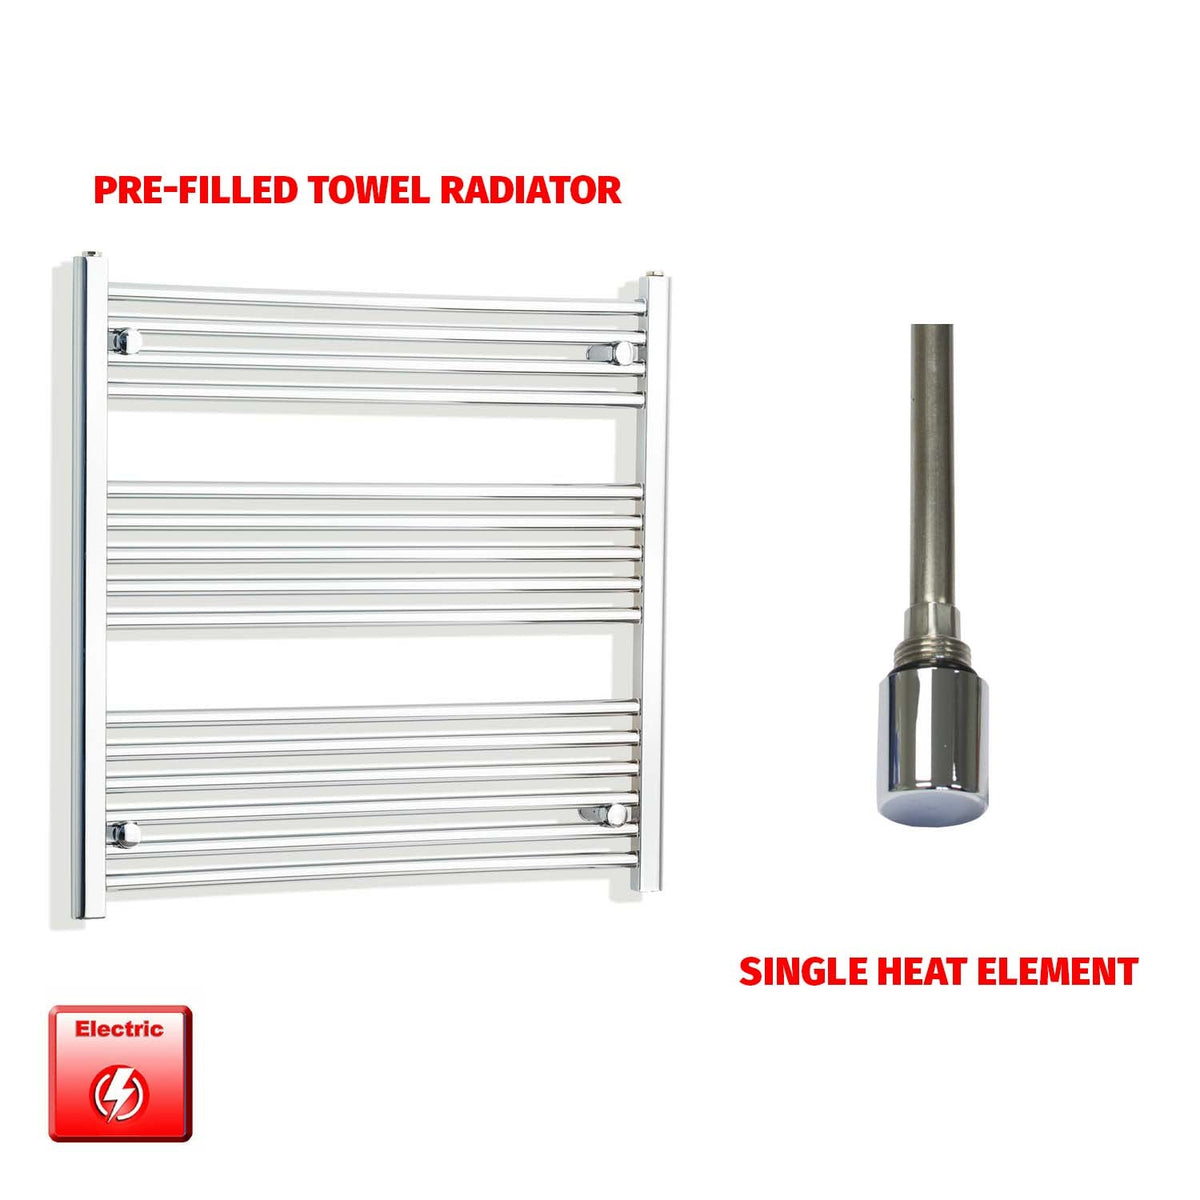 800mm High 850mm Wide Pre-Filled Electric Heated Towel Rail Radiator Straight Chrome Single heat element no timer